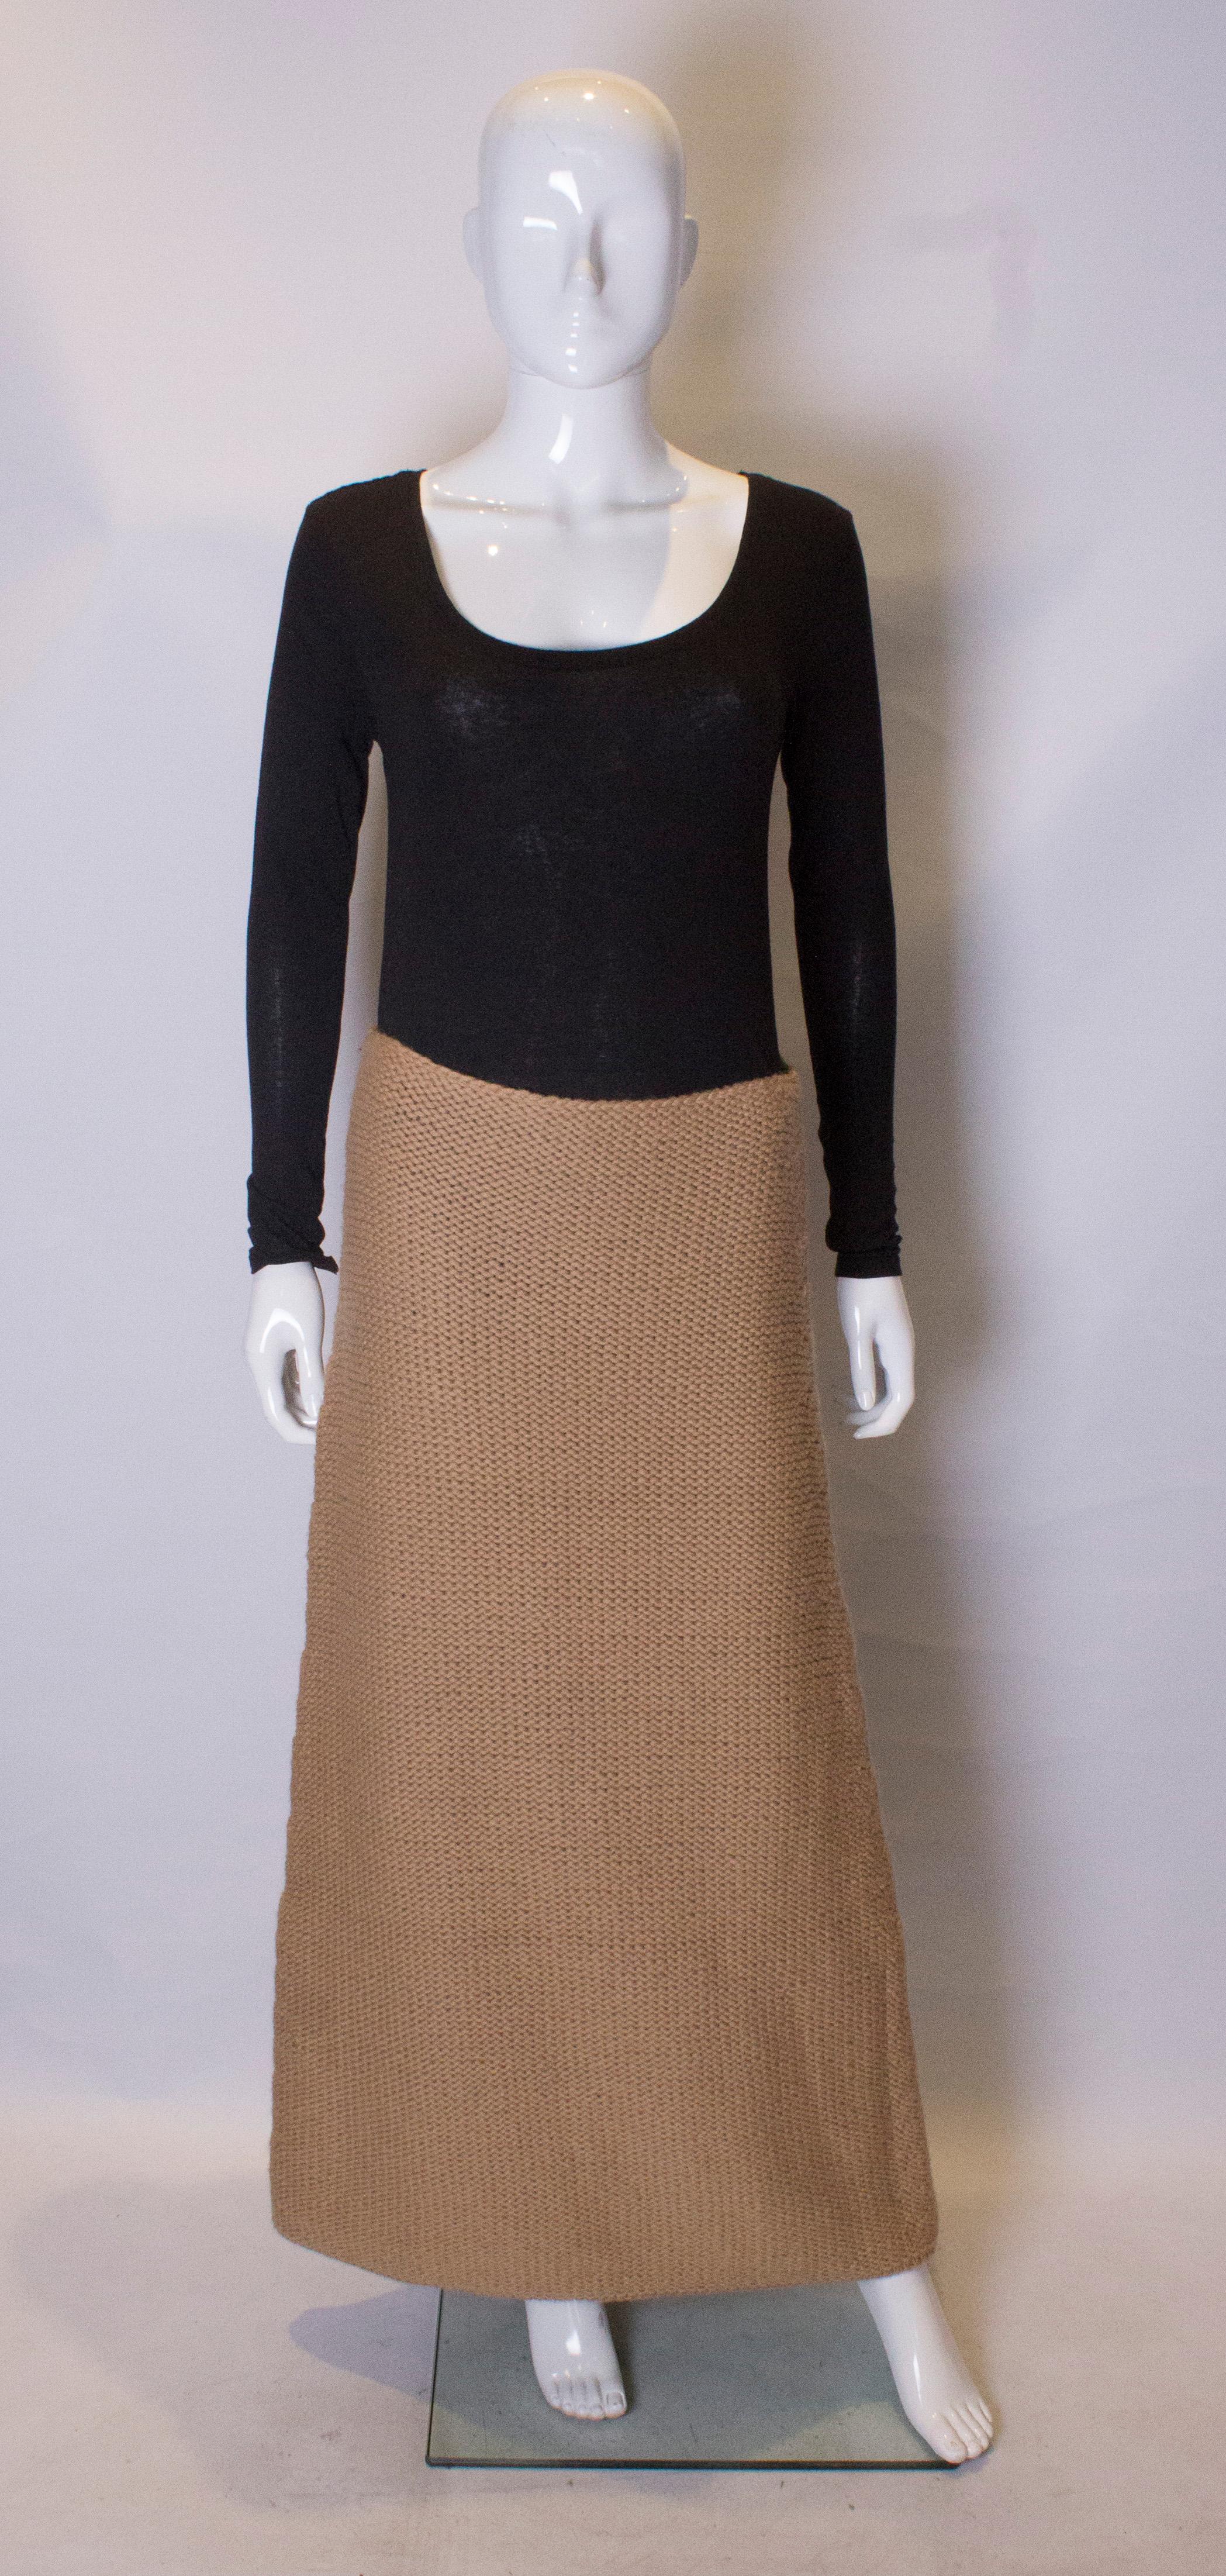 A cut caramel colour knitted skirt by Alberta Ferreti.  The skirt is a line, with a side zip opening, and is knitted in a heavy wool.